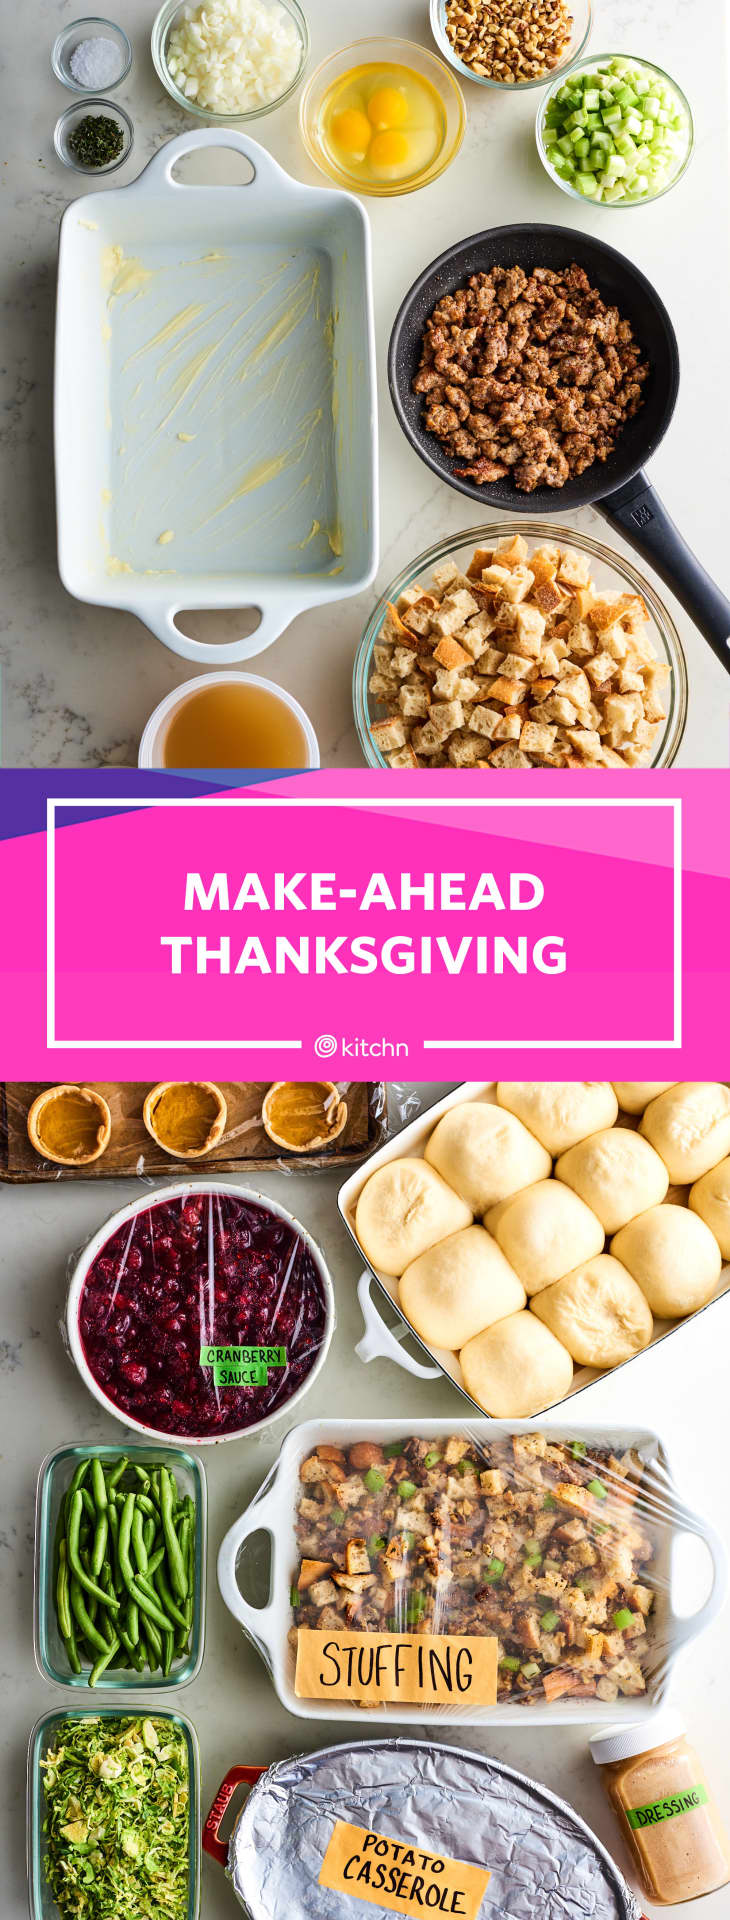 Thanksgiving Dishes You Should Always Make Ahead